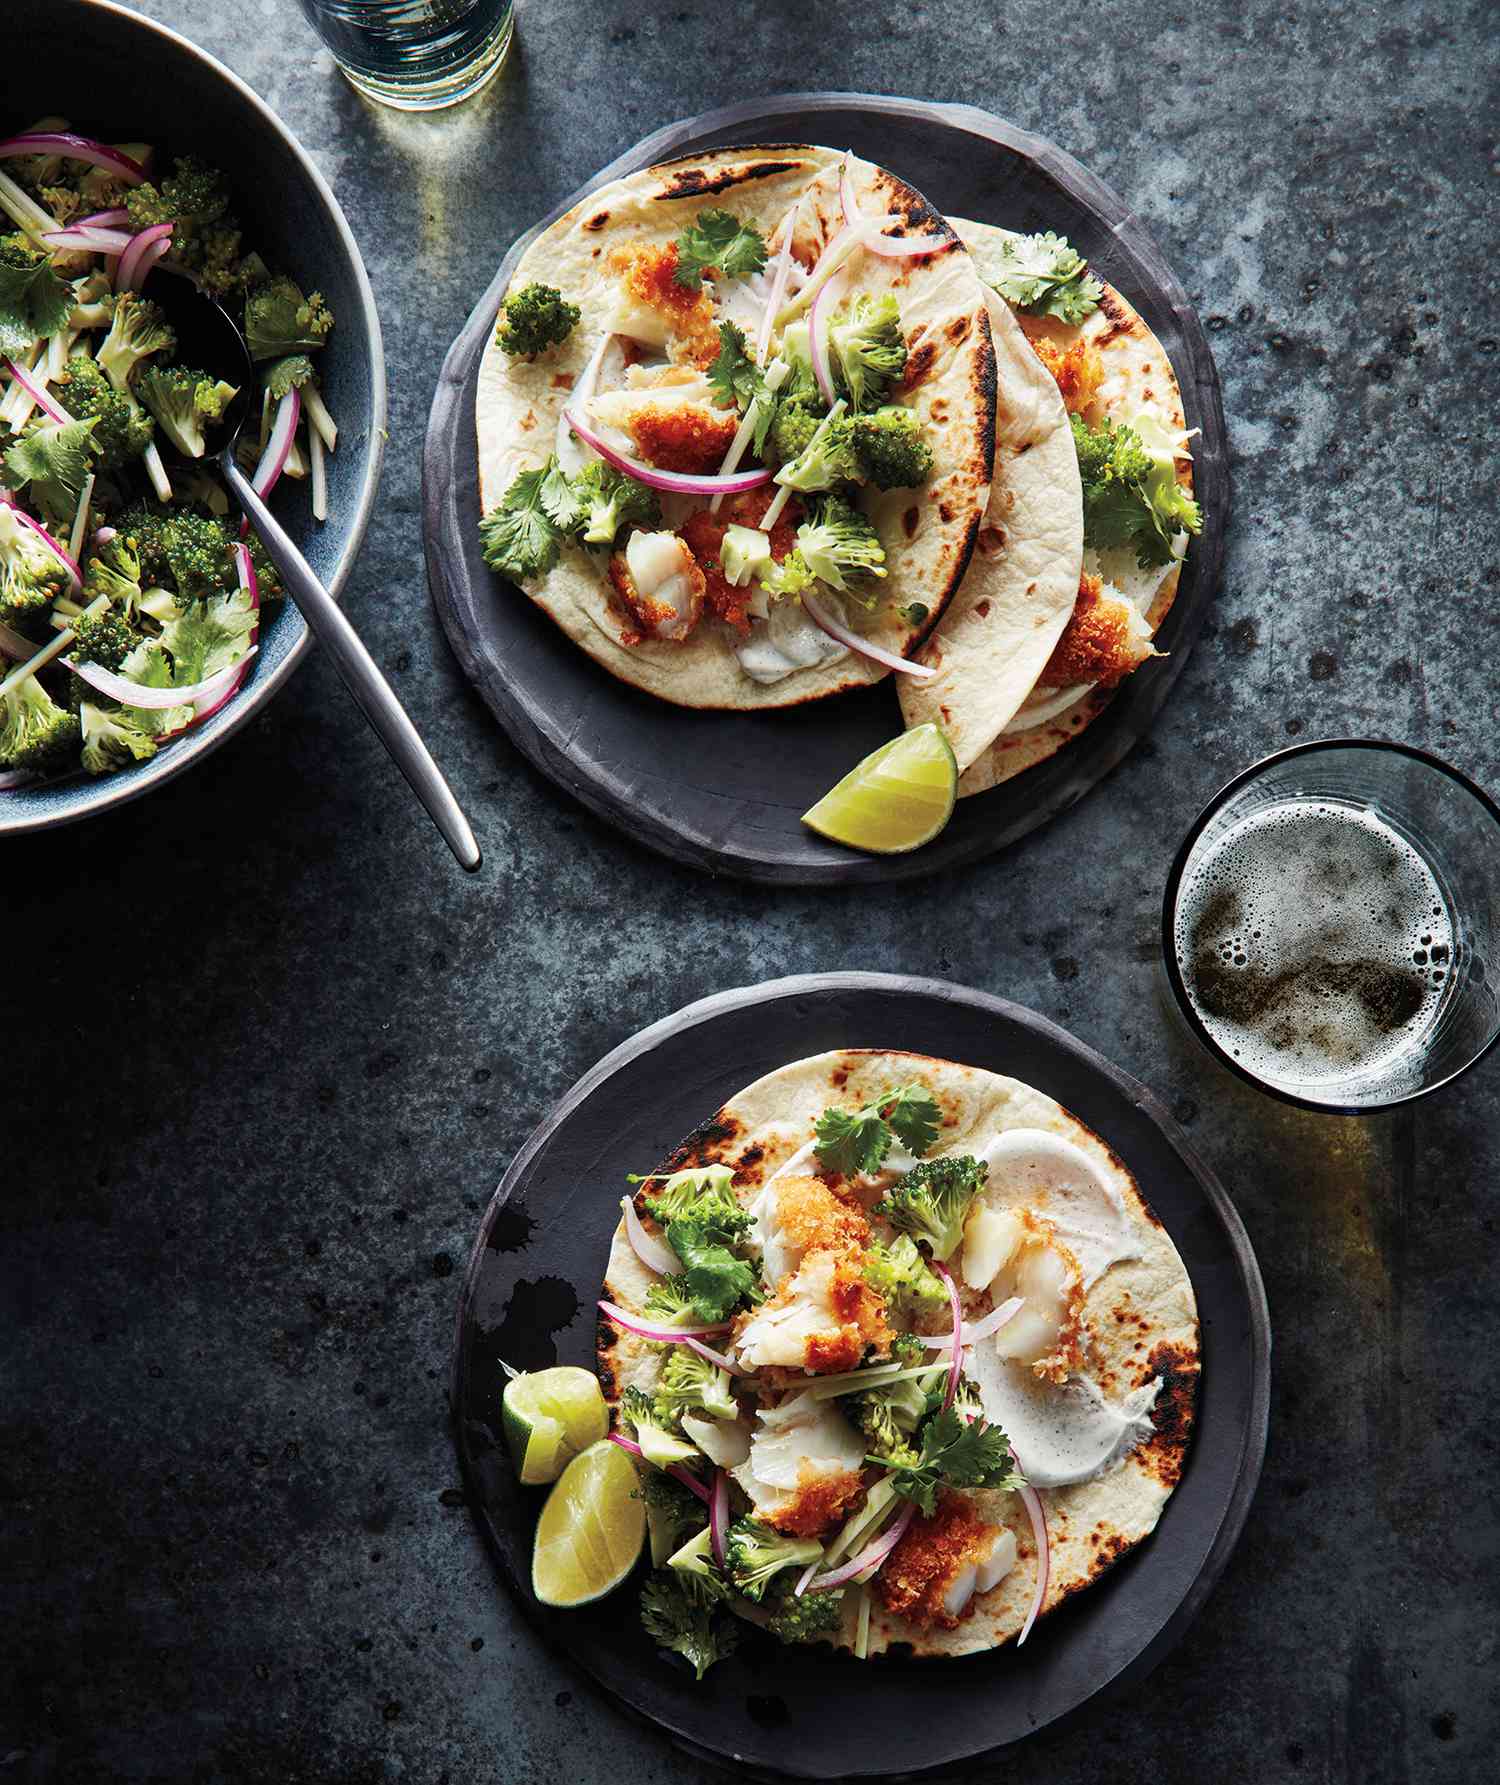 Fish Tacos With Broccoli Slaw and Cumin Sour Cream